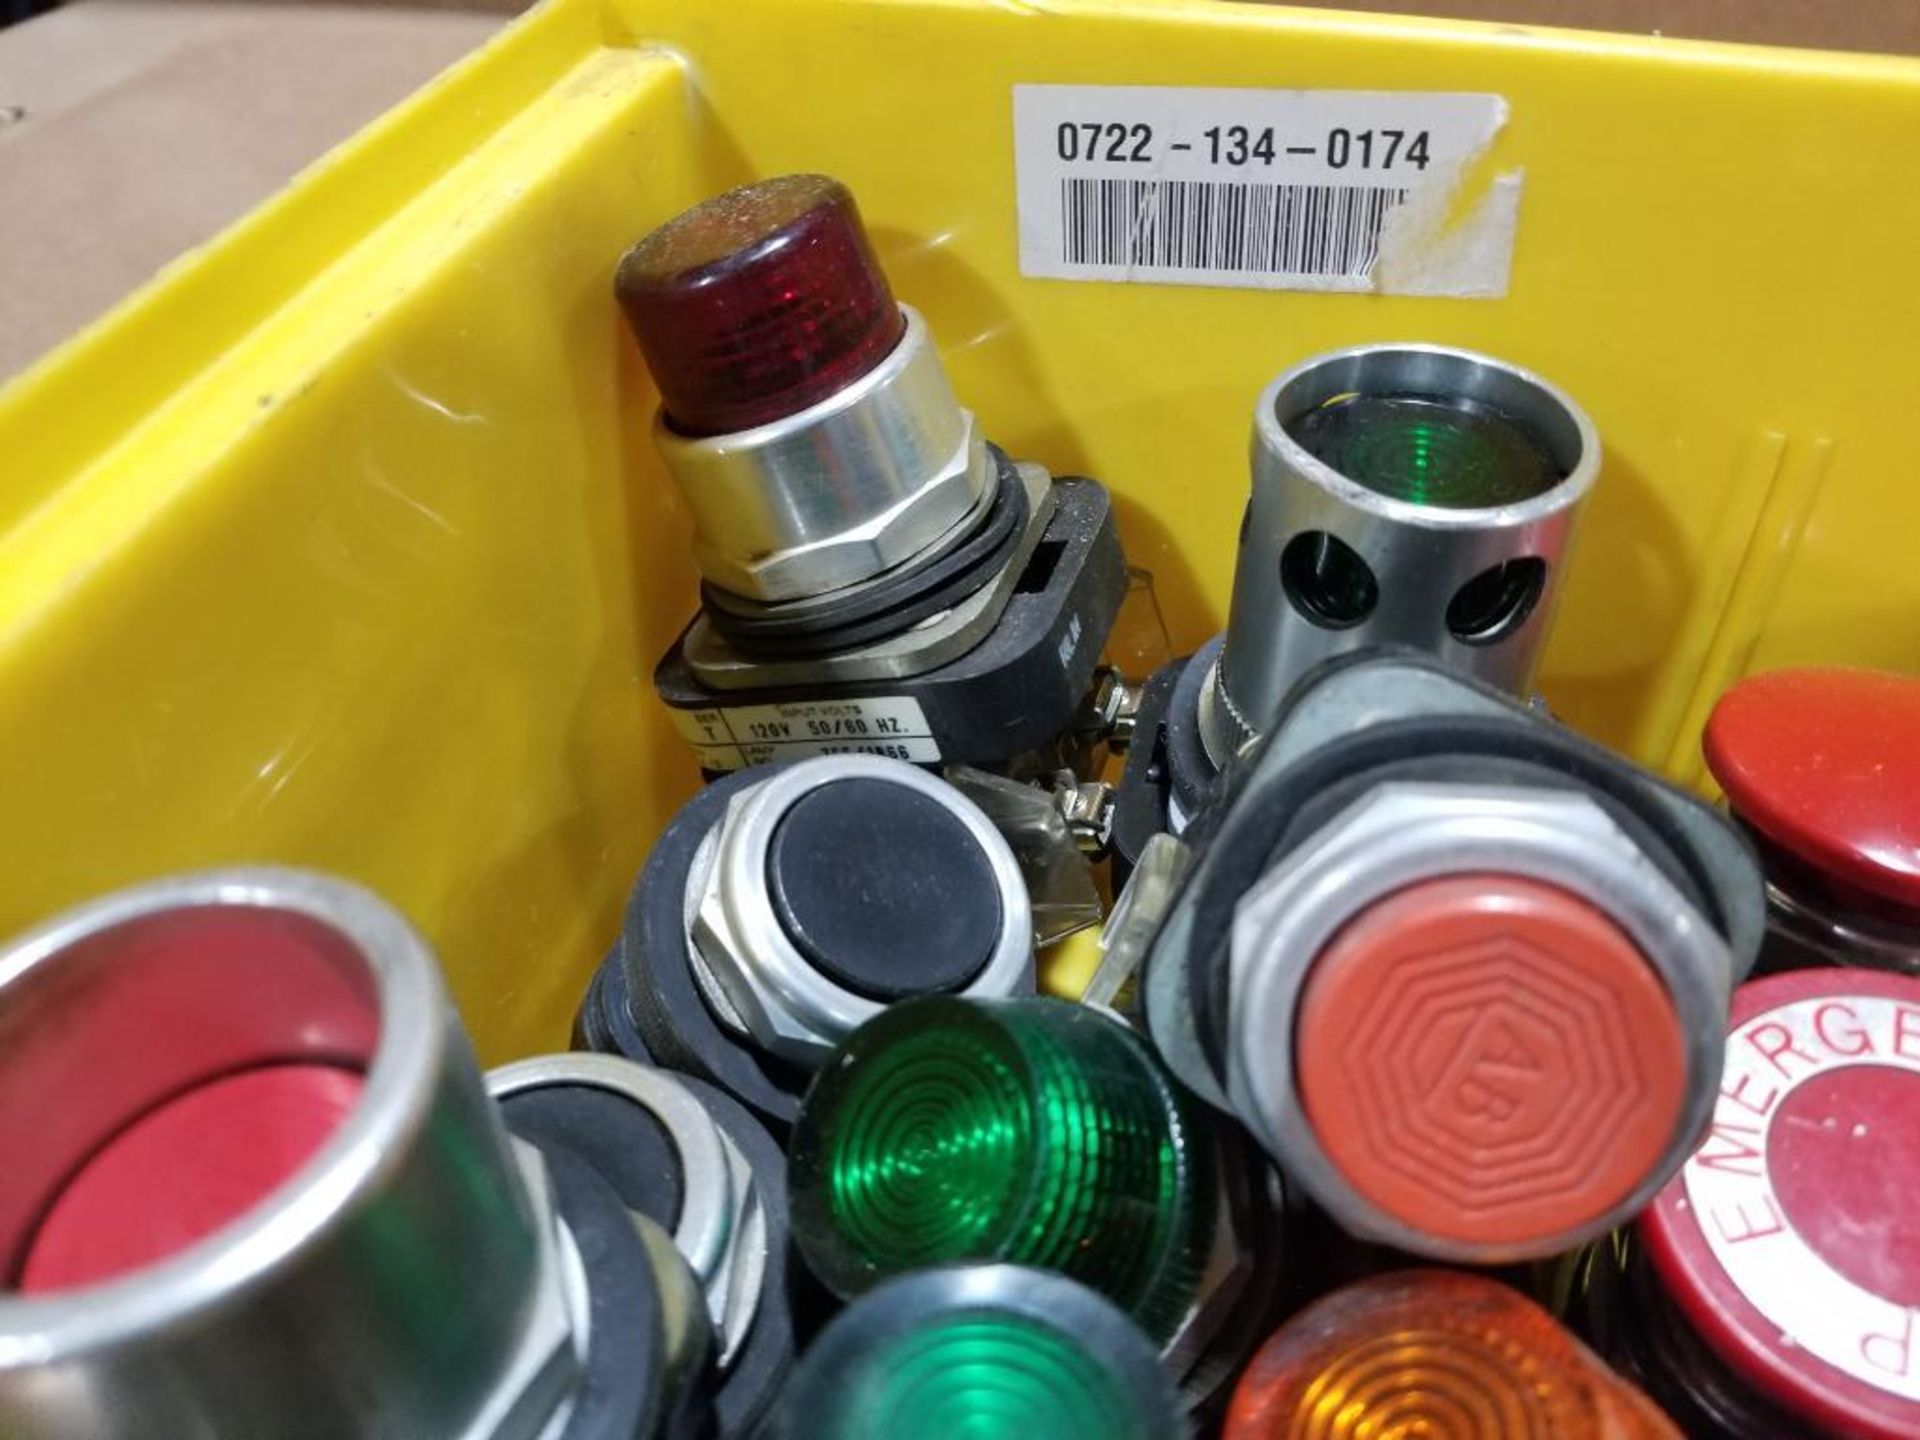 Large assortment of push buttons and pilot lights. - Image 2 of 8